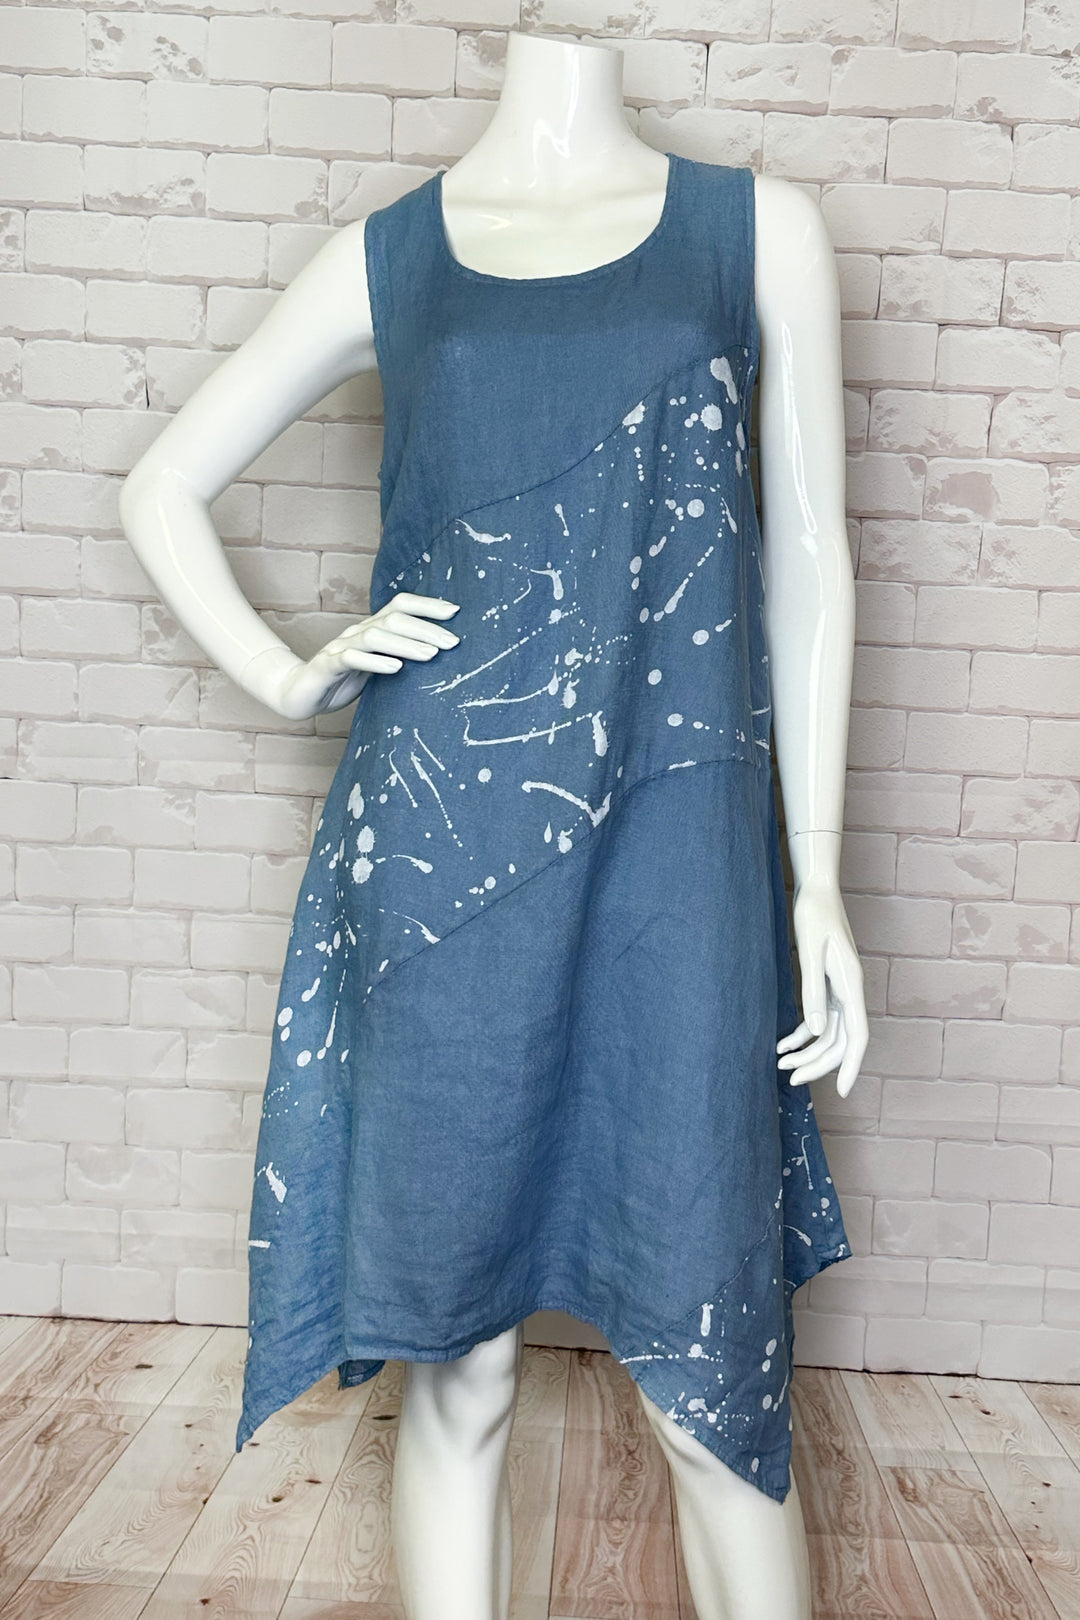 CHERISHH Spring 2024 The pointed edge hem adds a touch of elegance to the playful splatter paint design. Made from lightweight linen, this sleeveless dress features a boat neck and wavy details.